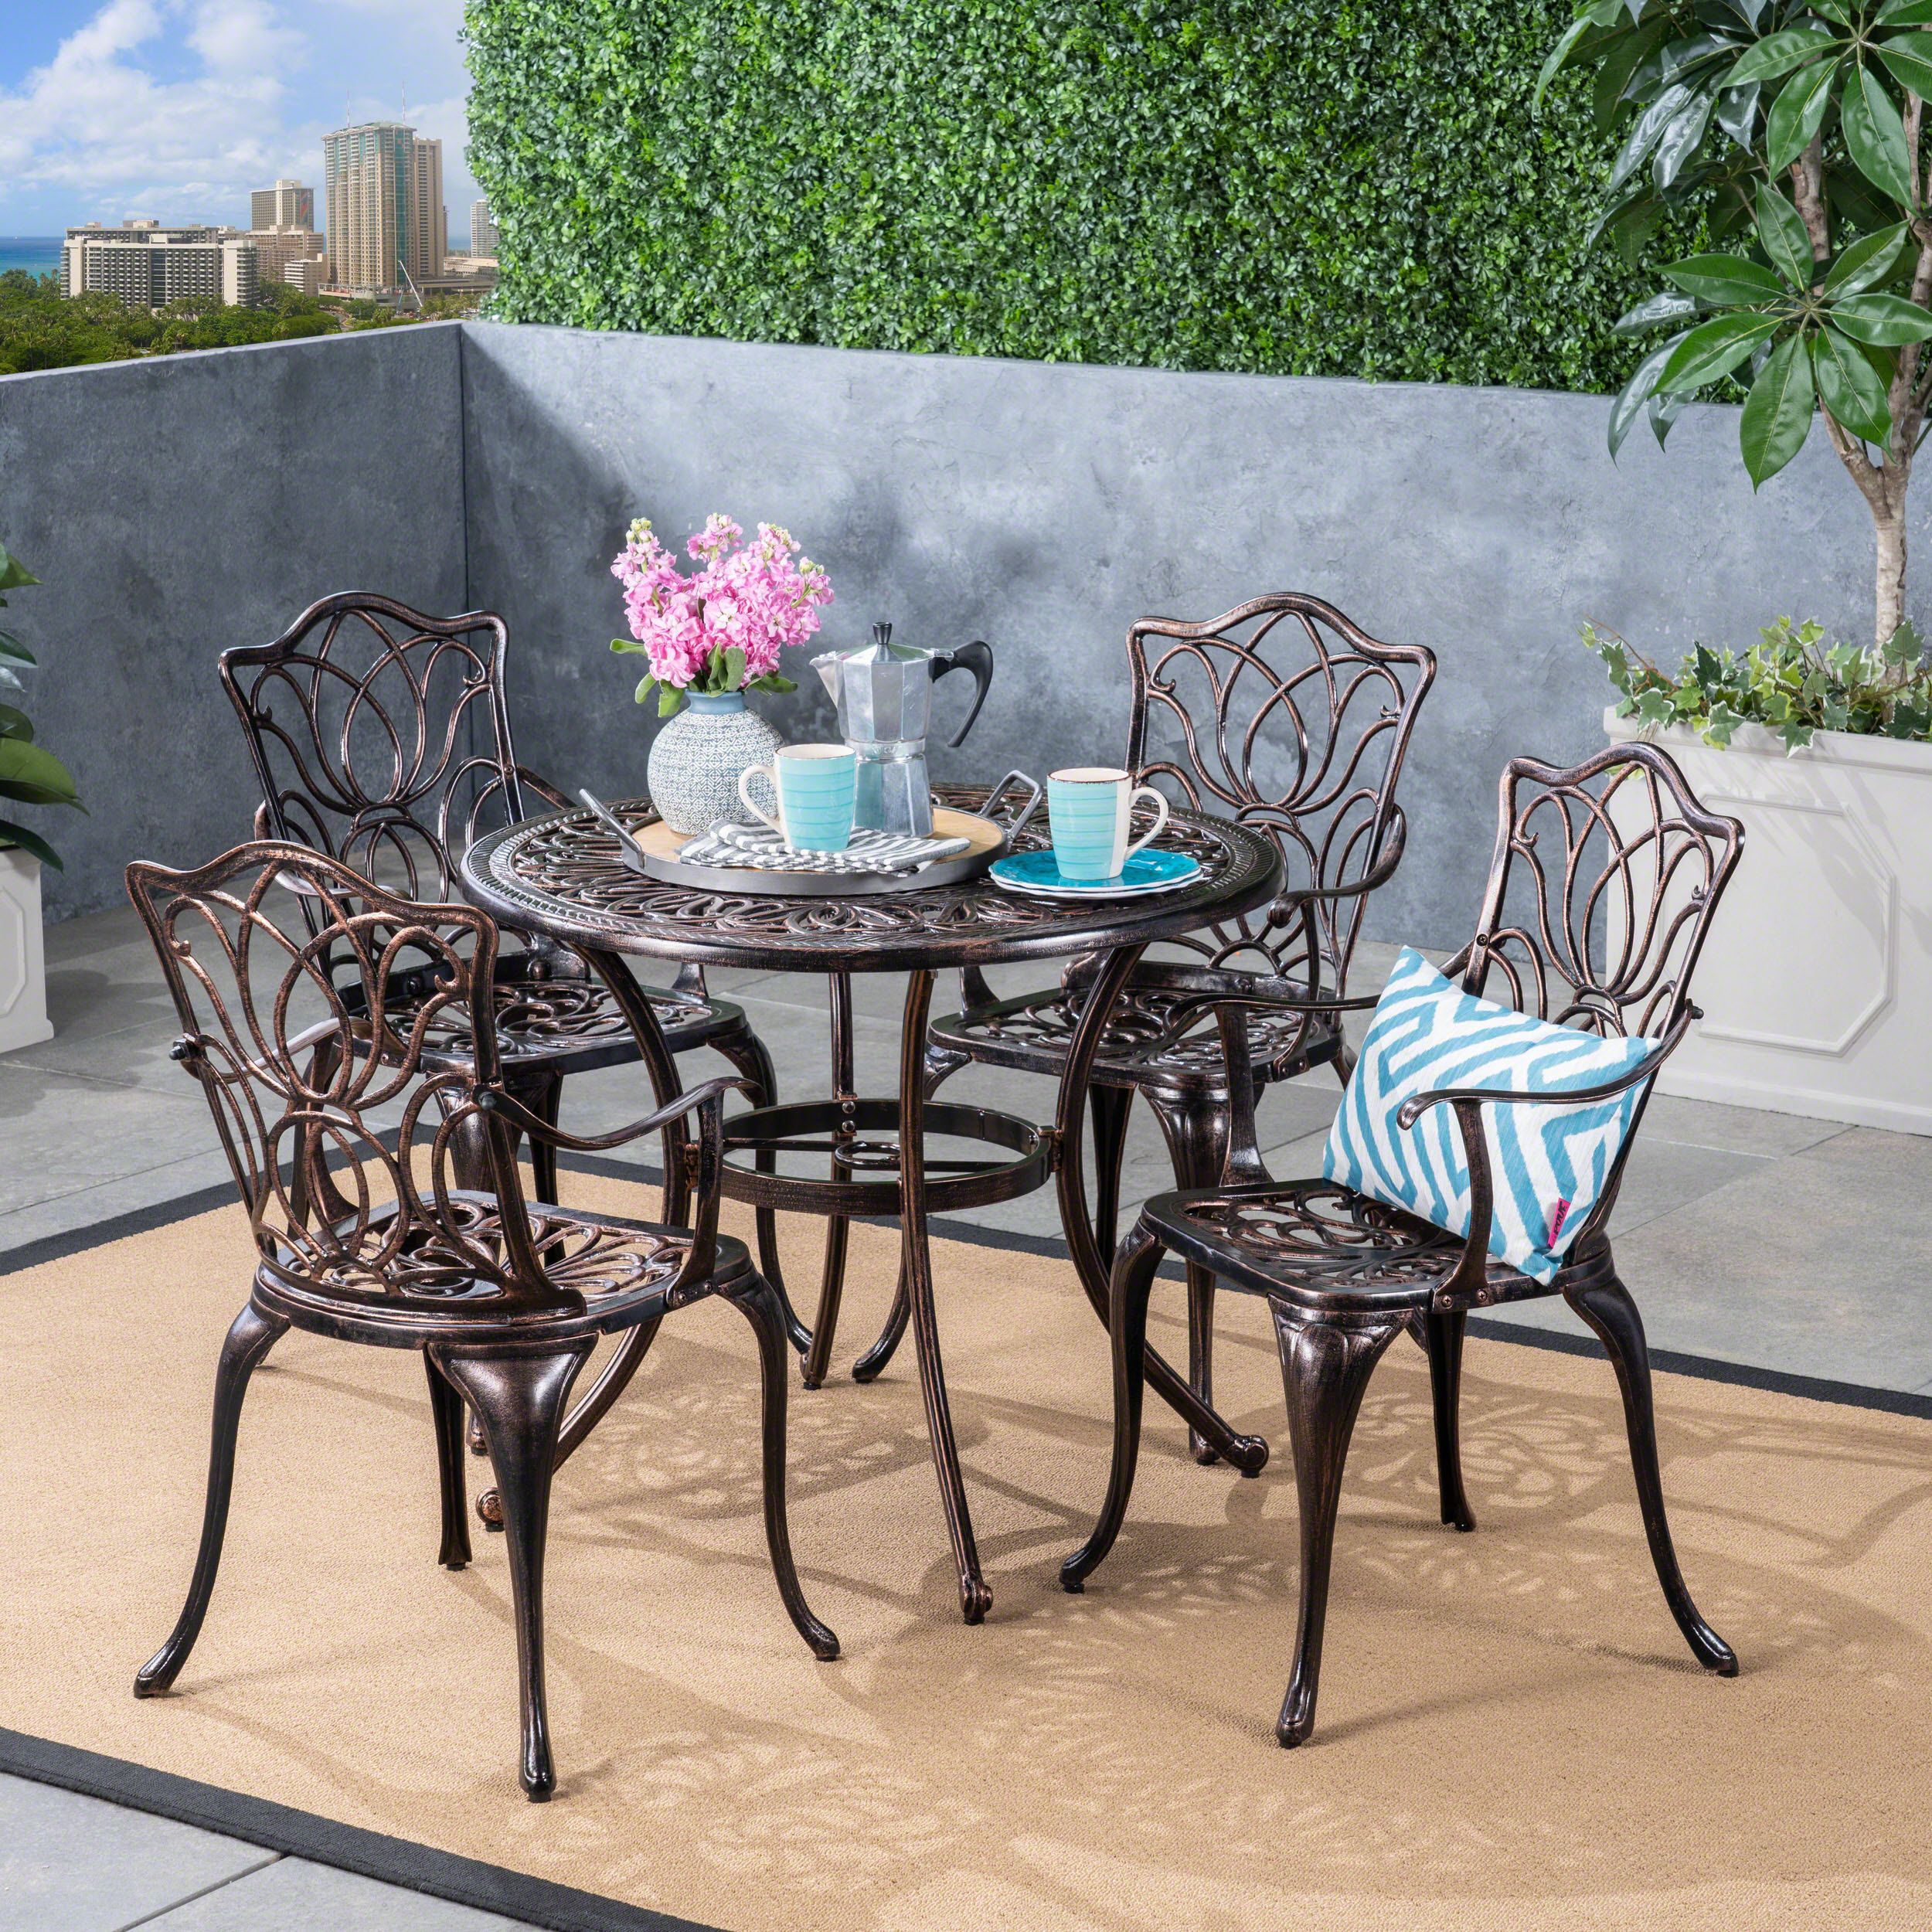 Clayton Outdoor 5 Piece Cast Aluminum Round Table Dining Set, Shiny For 5 Piece Round Dining Sets (View 5 of 15)